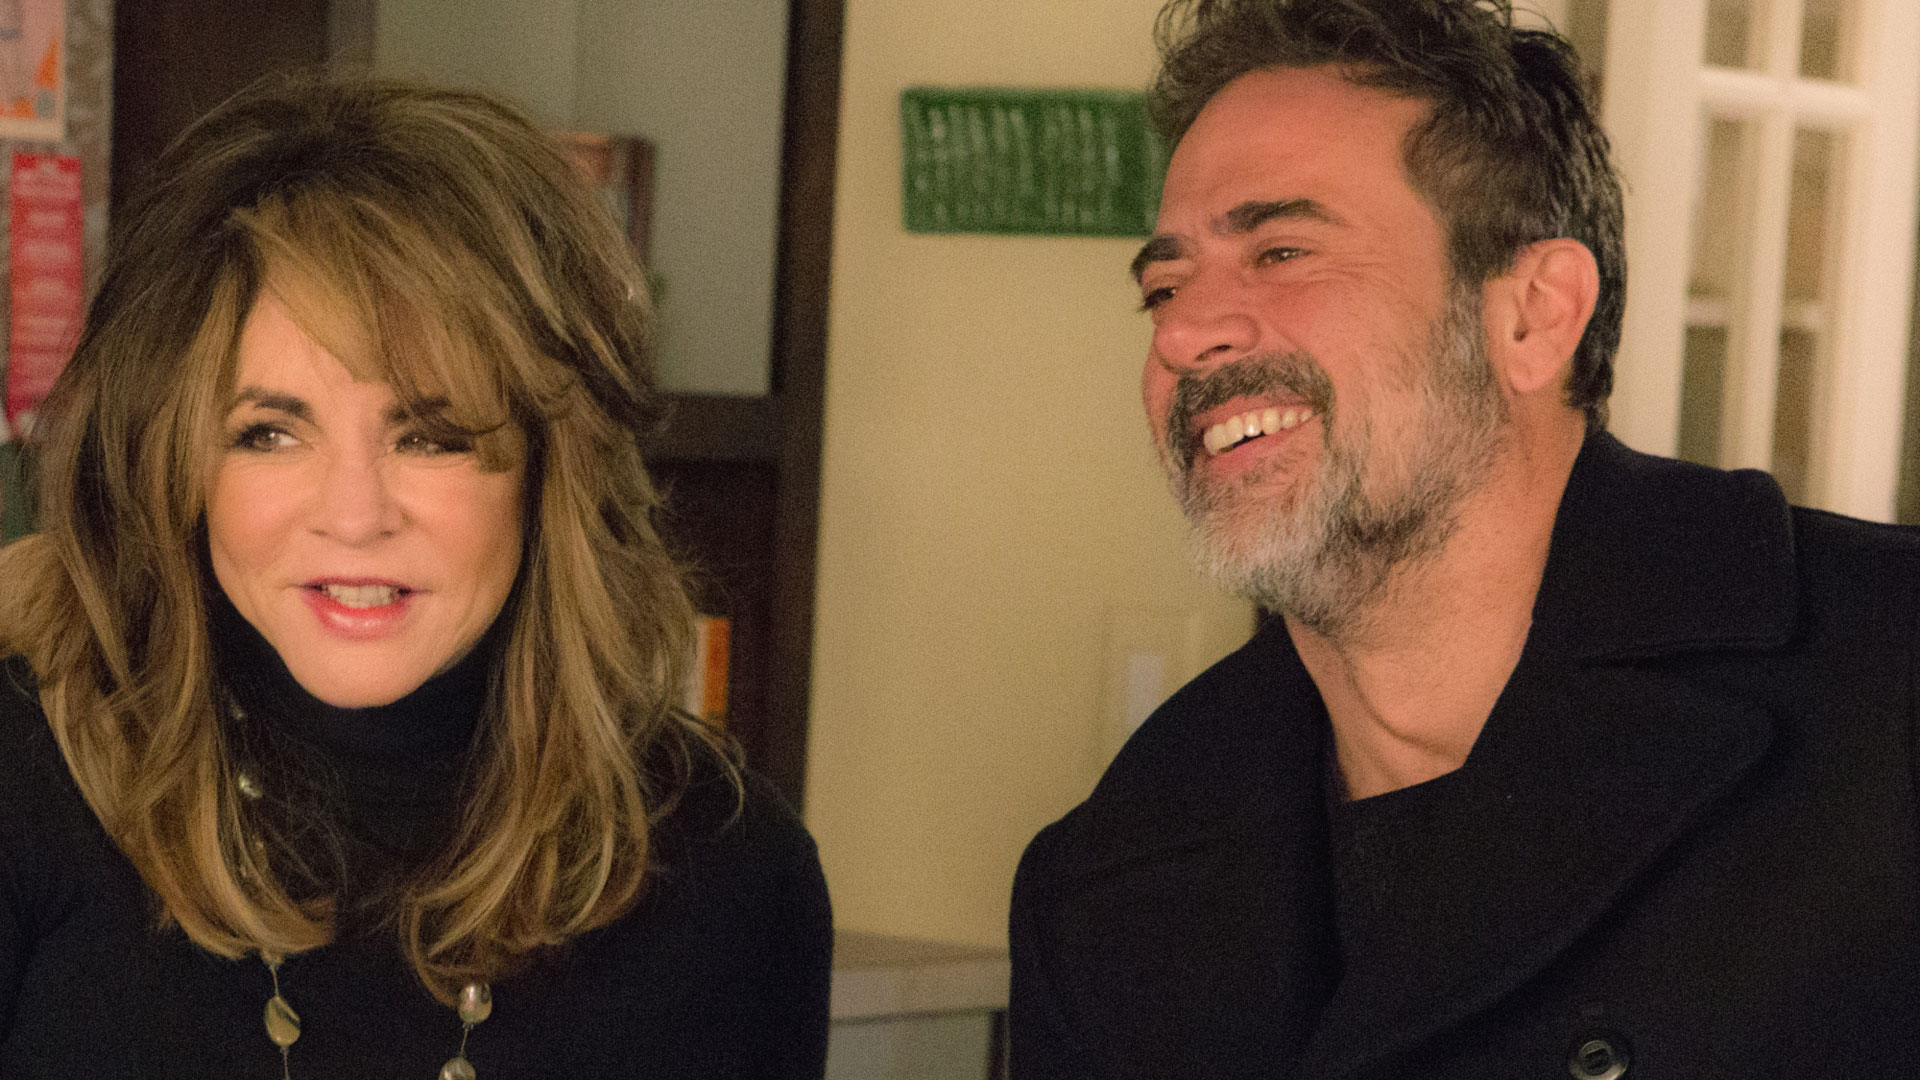 Stockard Channing as Veronica Loy and Jeffrey Dean Morgan as Jason Crouse